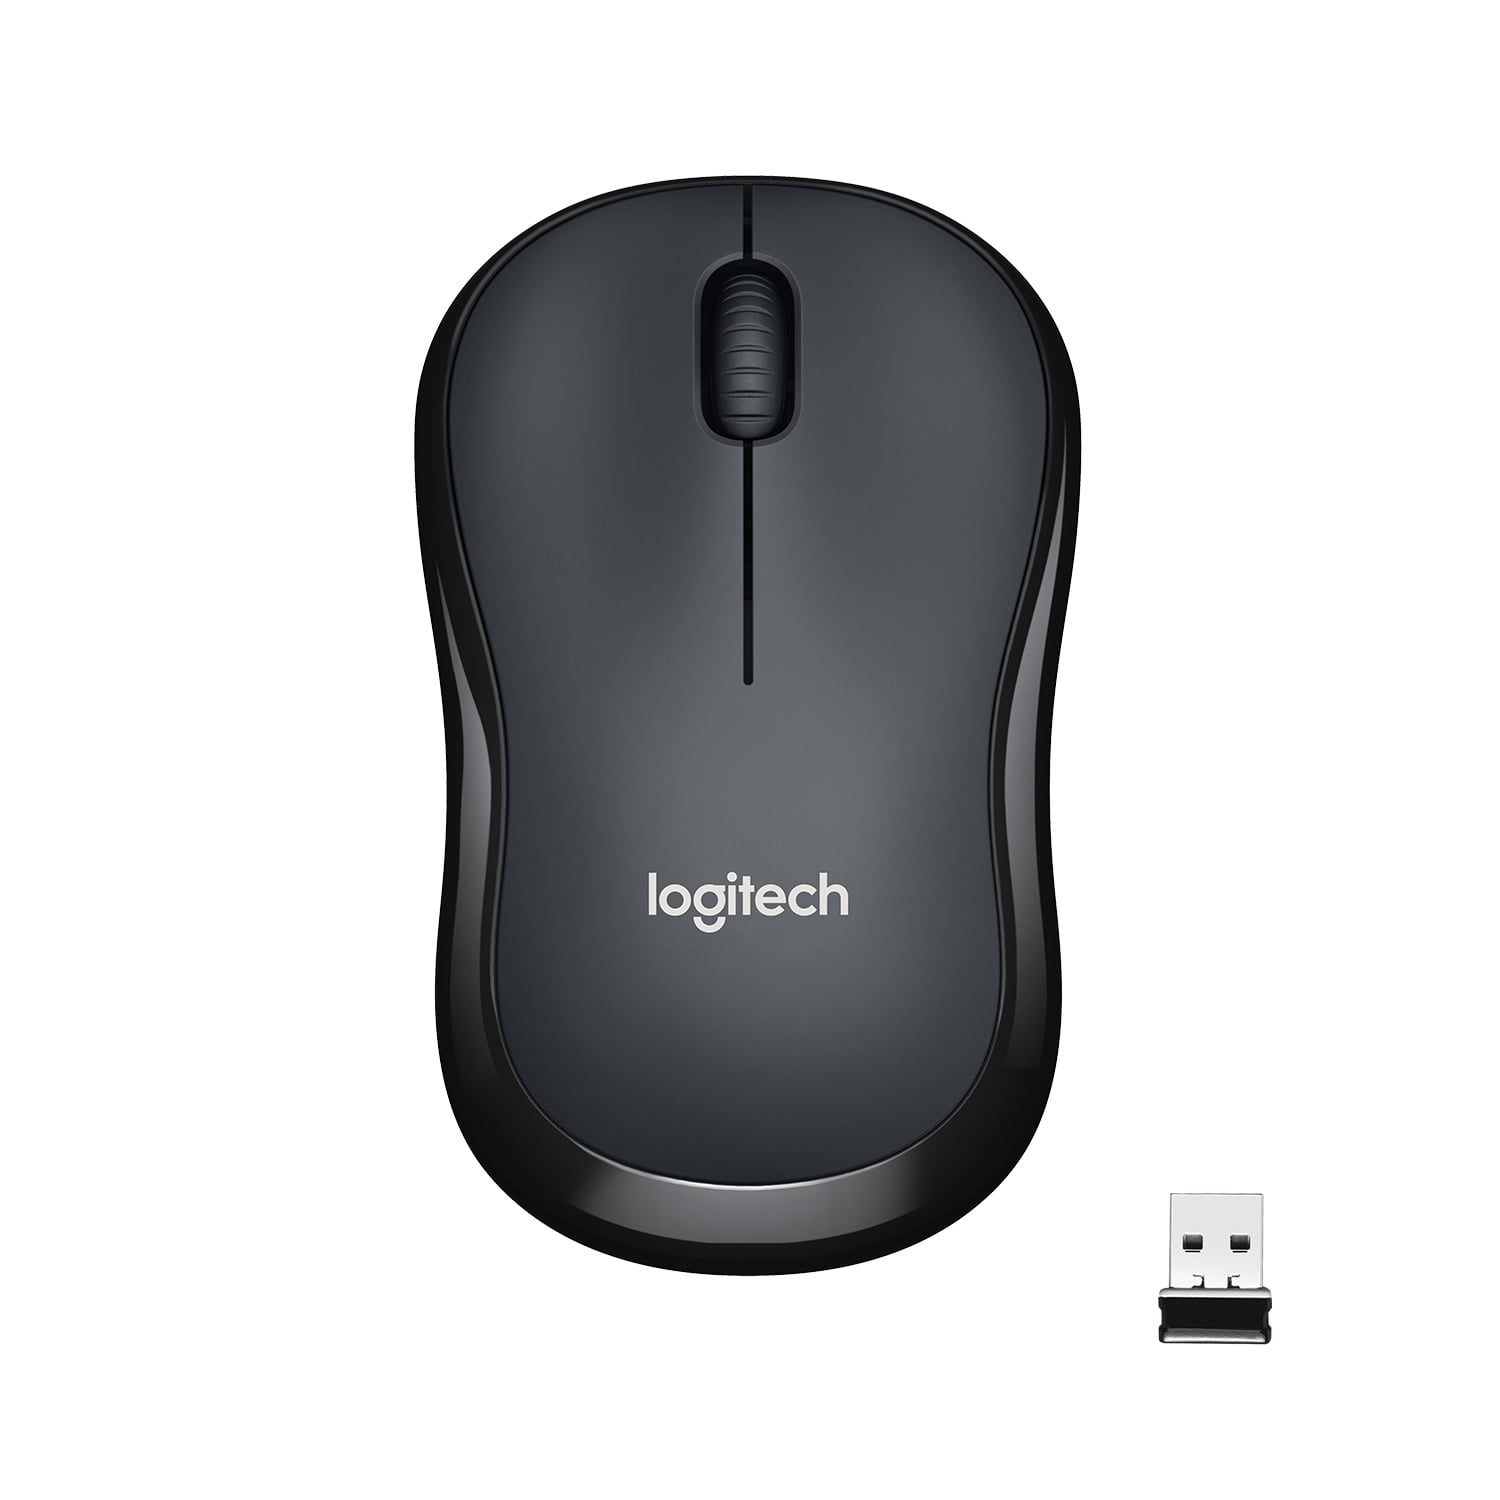 Logitech Silent Wireless Mouse, 2.4 GHz with USB Receiver, 1000